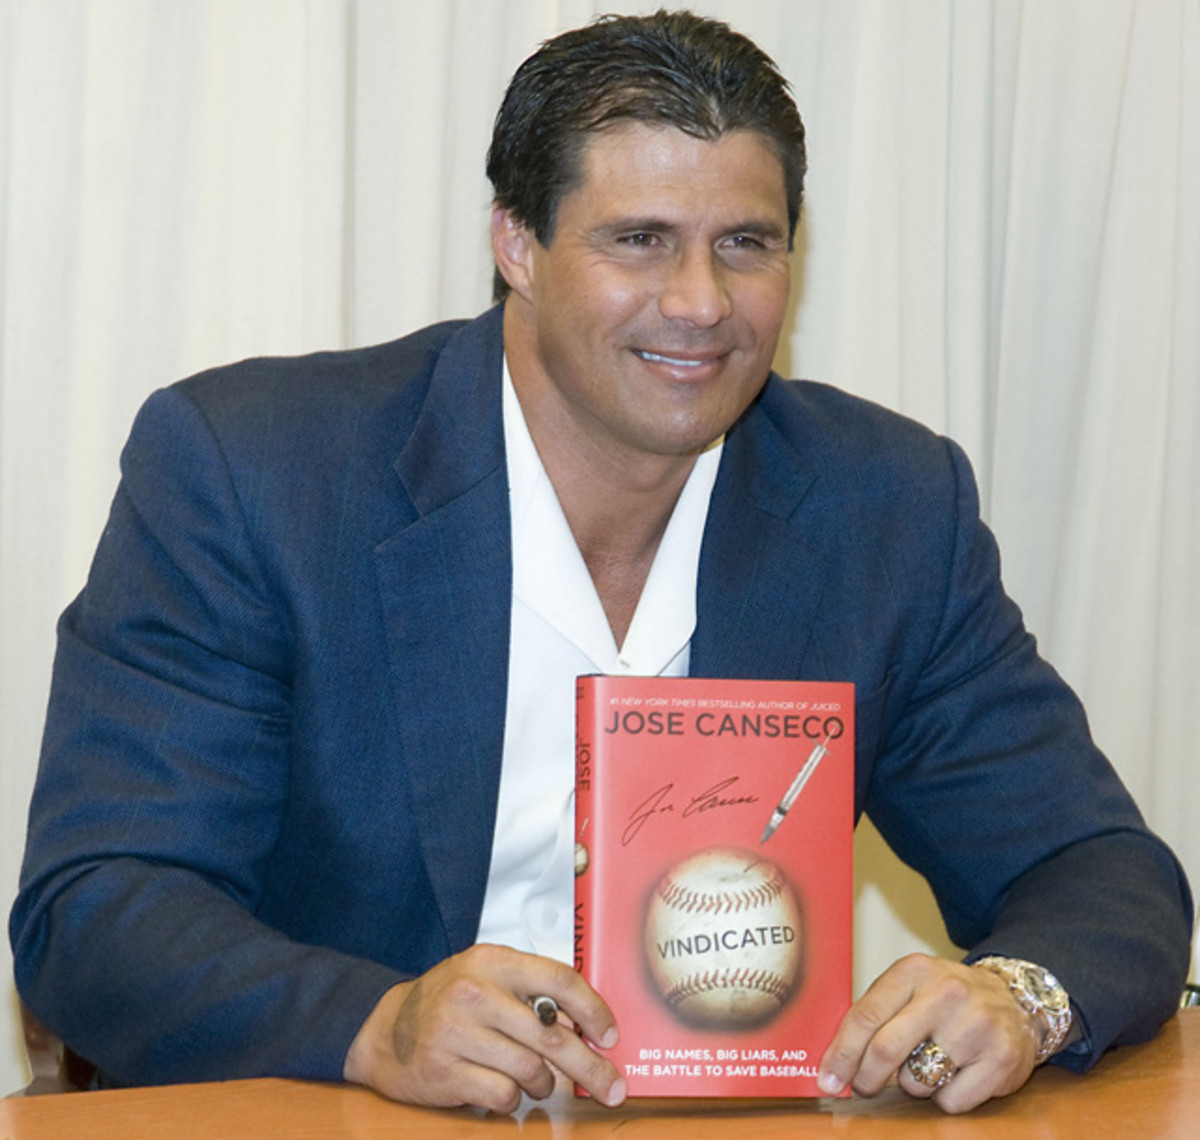 Jose Canseco: Life After Retirement - Sports Illustrated